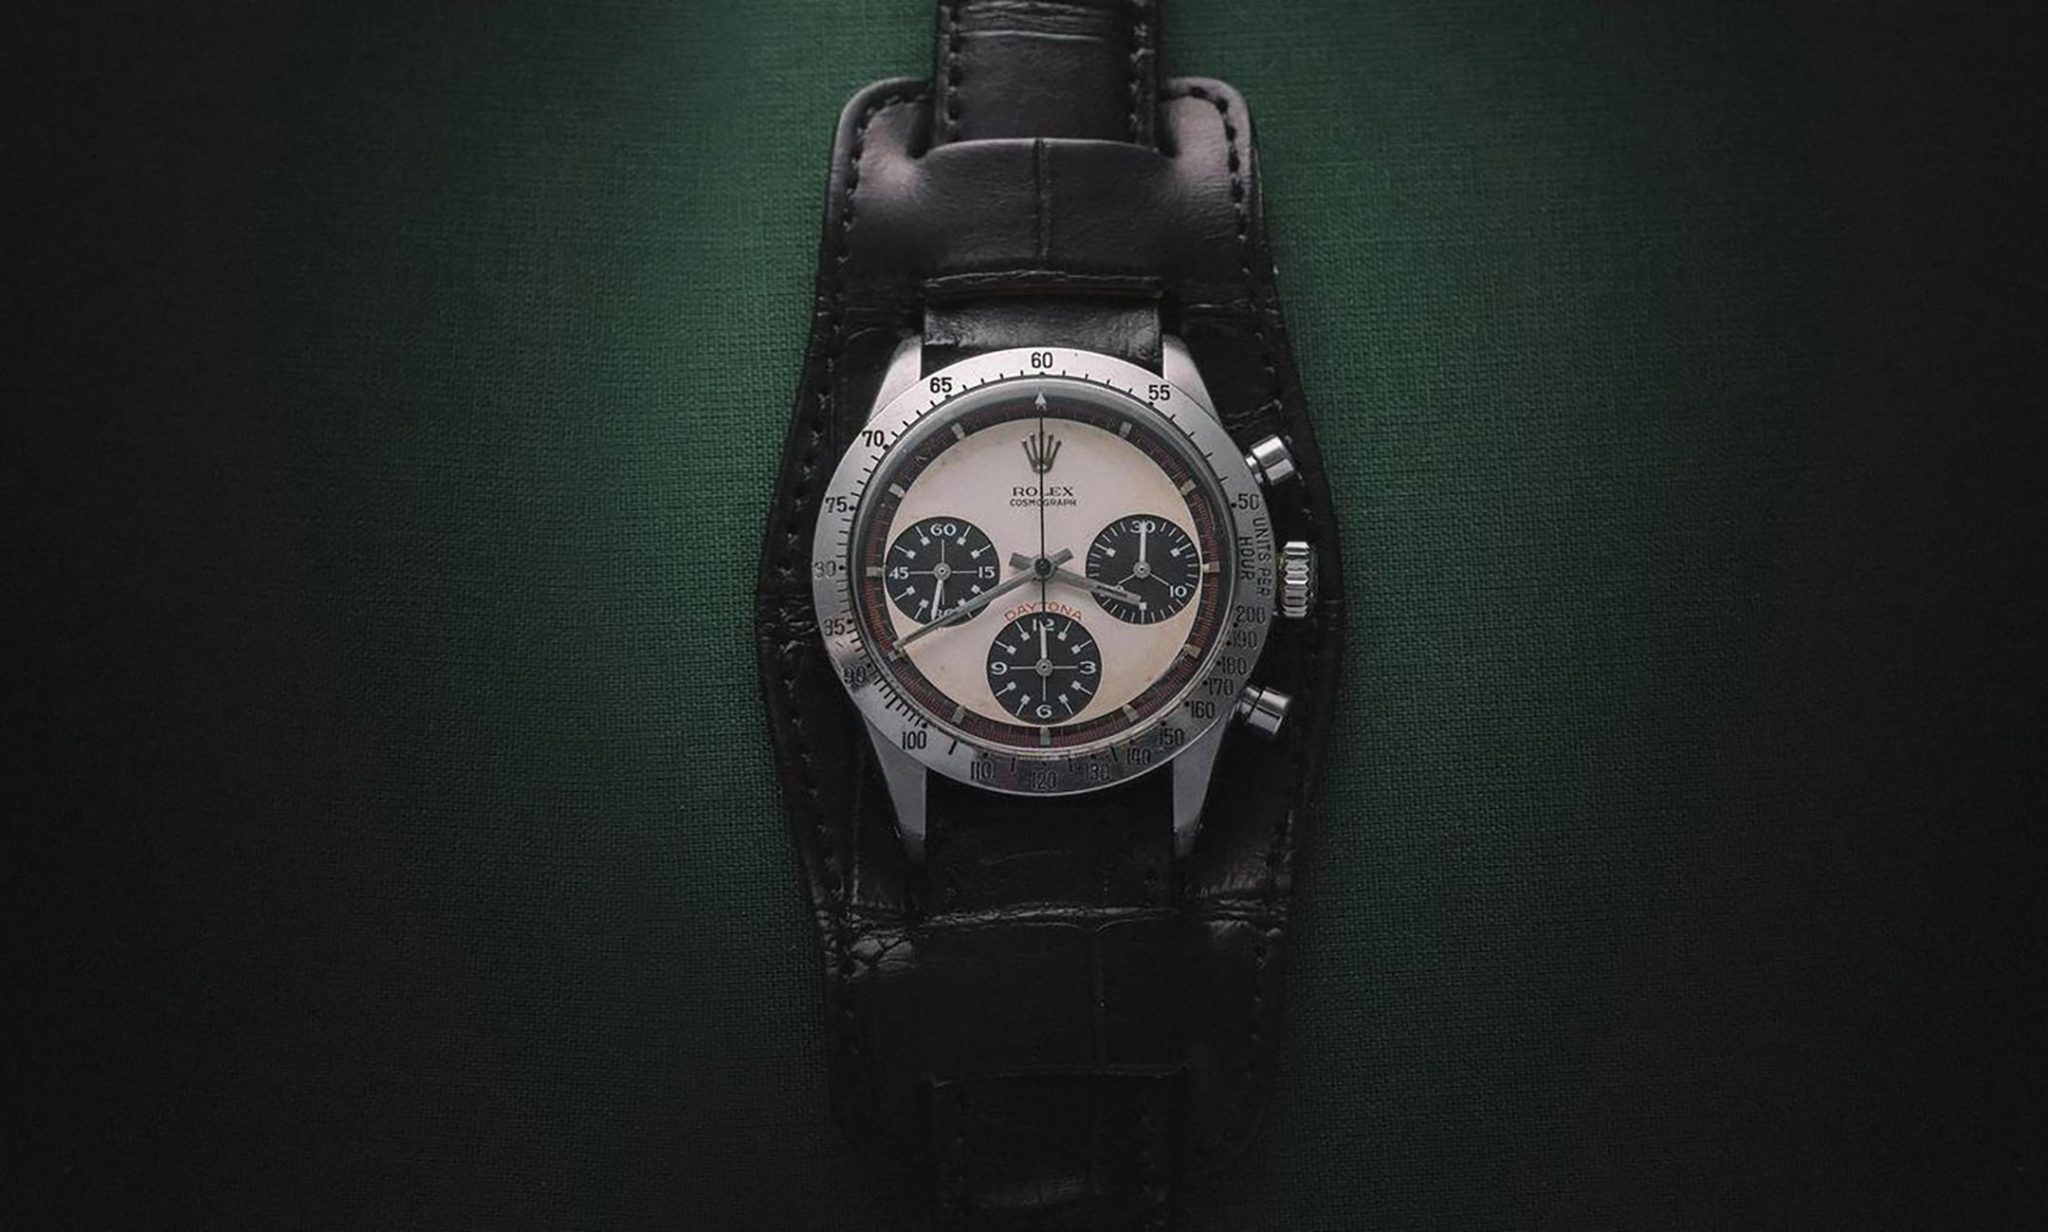 The-most-expensive-Rolex-Paul-Newman-Daytona-Ref-6263-Drive-Me-Carefully